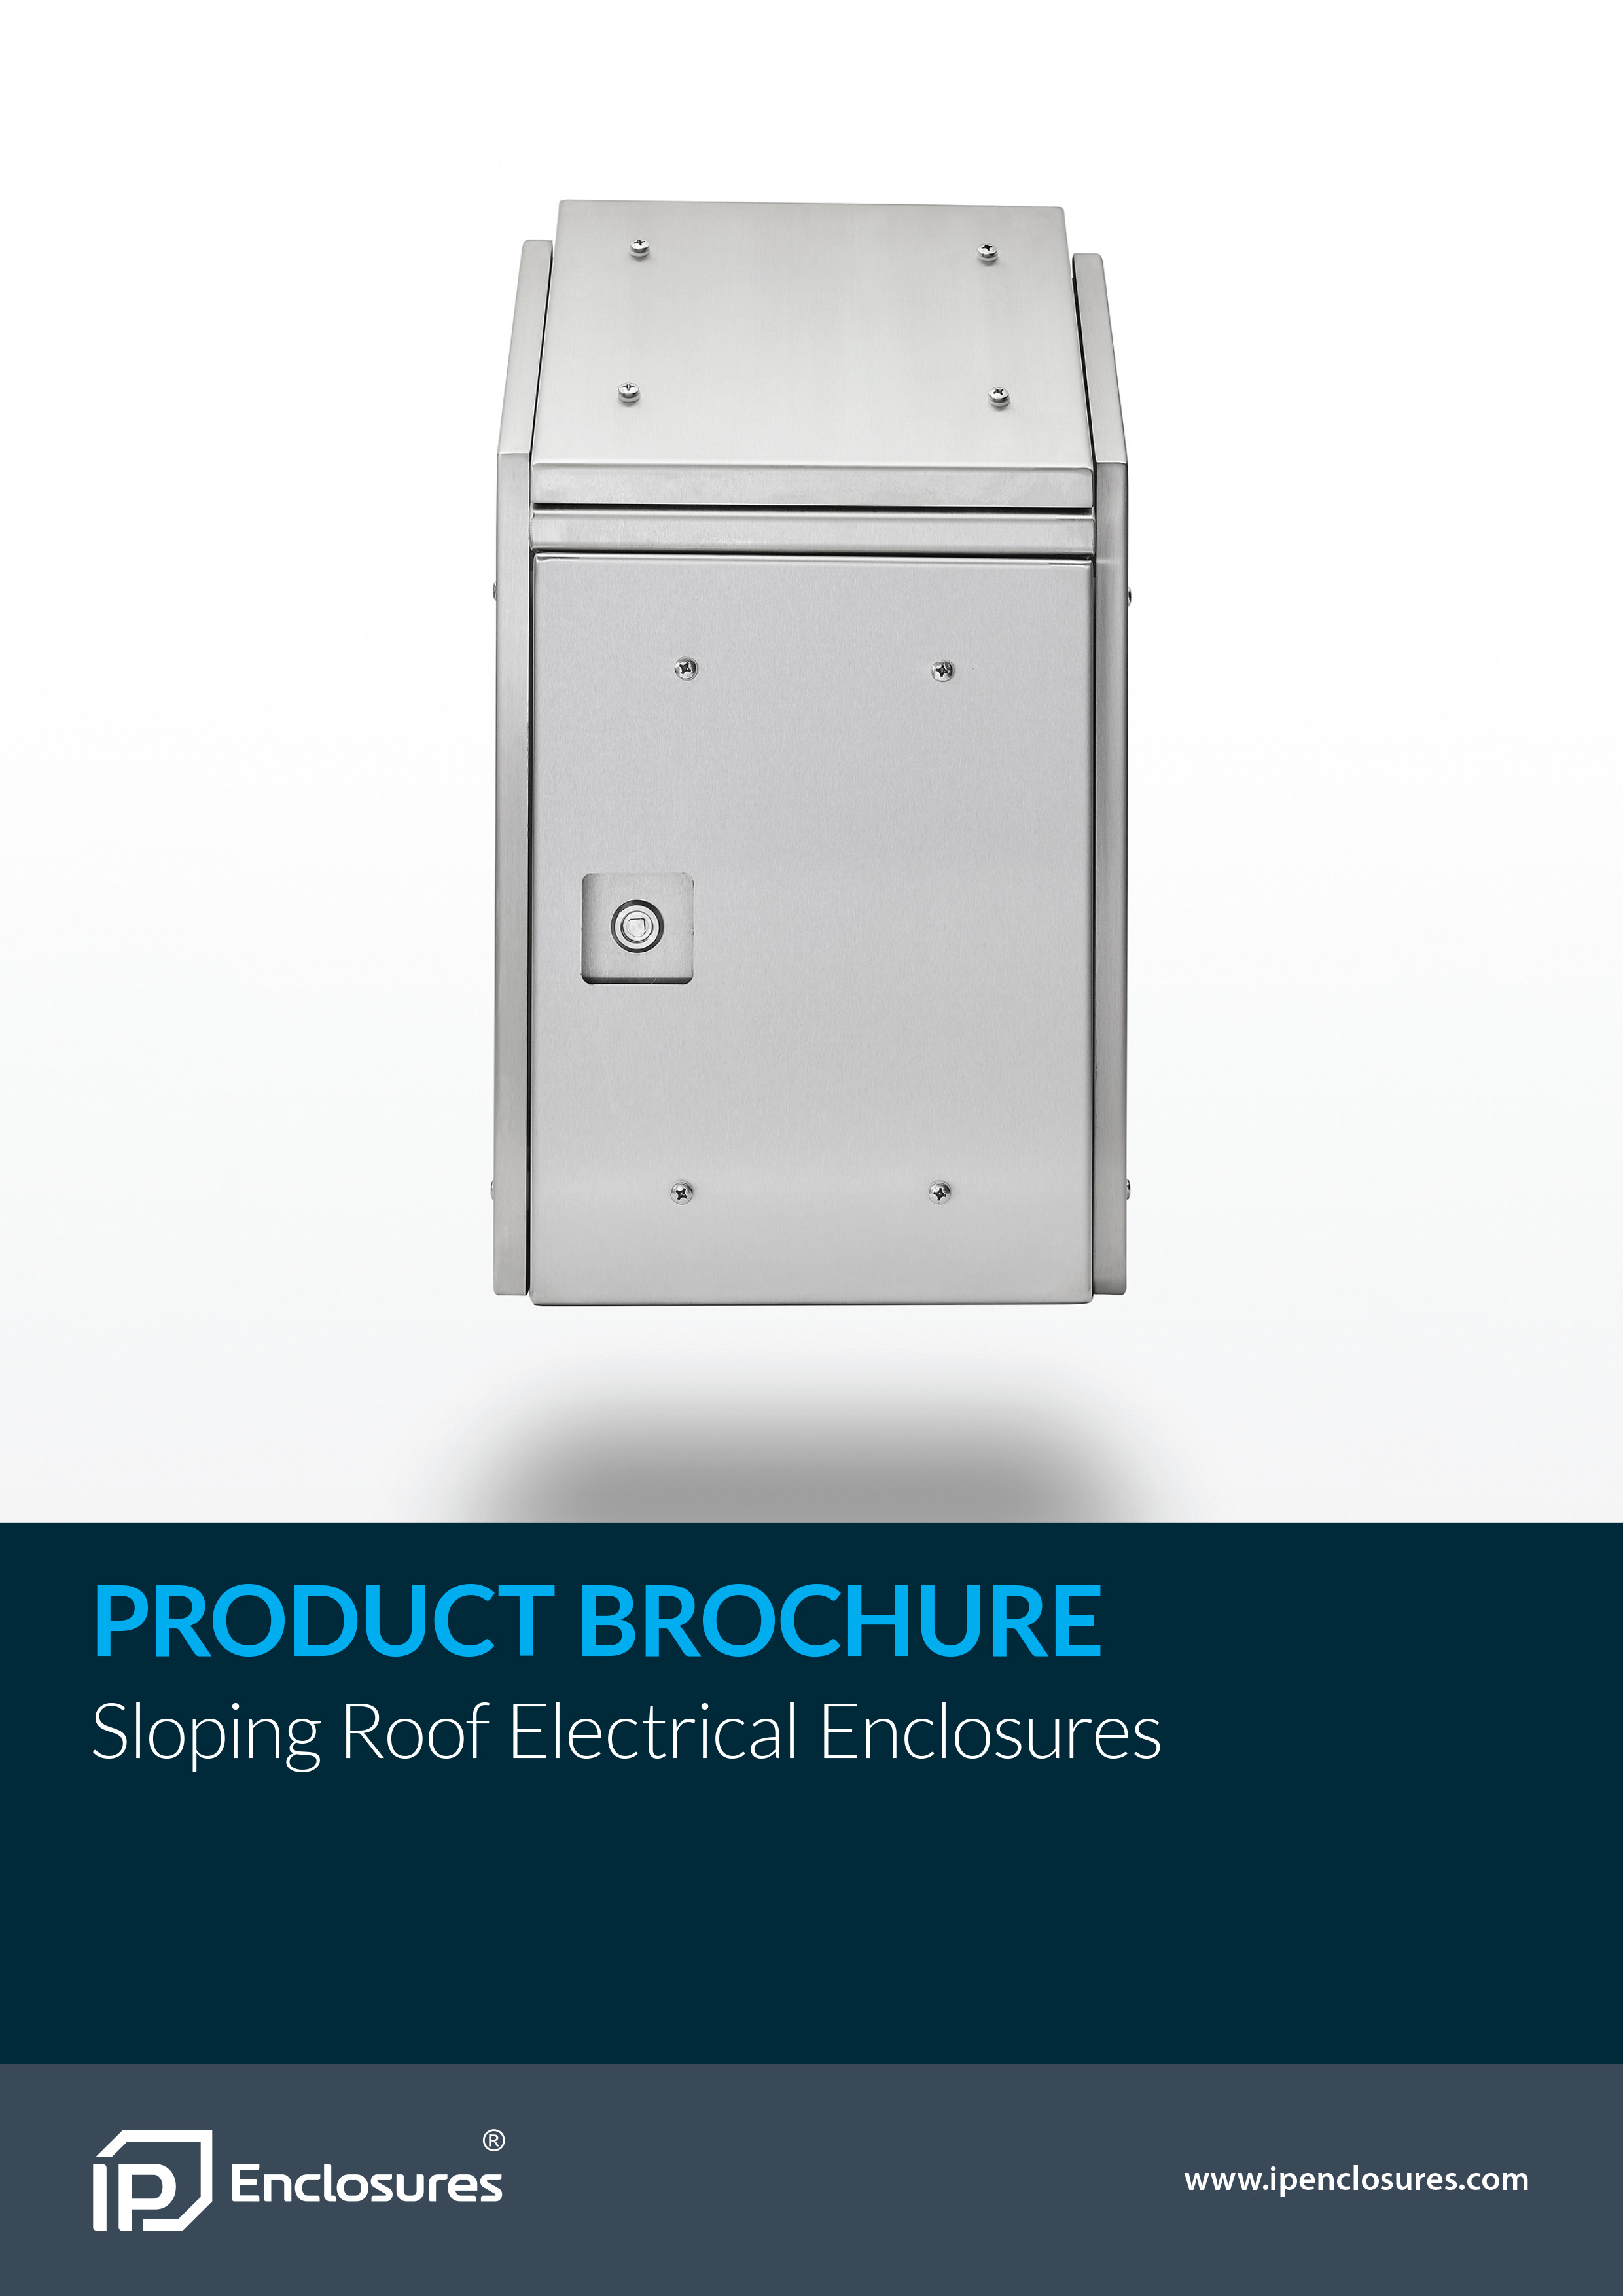 IP Enclosures - Sloping Roof Electrical Enclosures Brochure - Preview